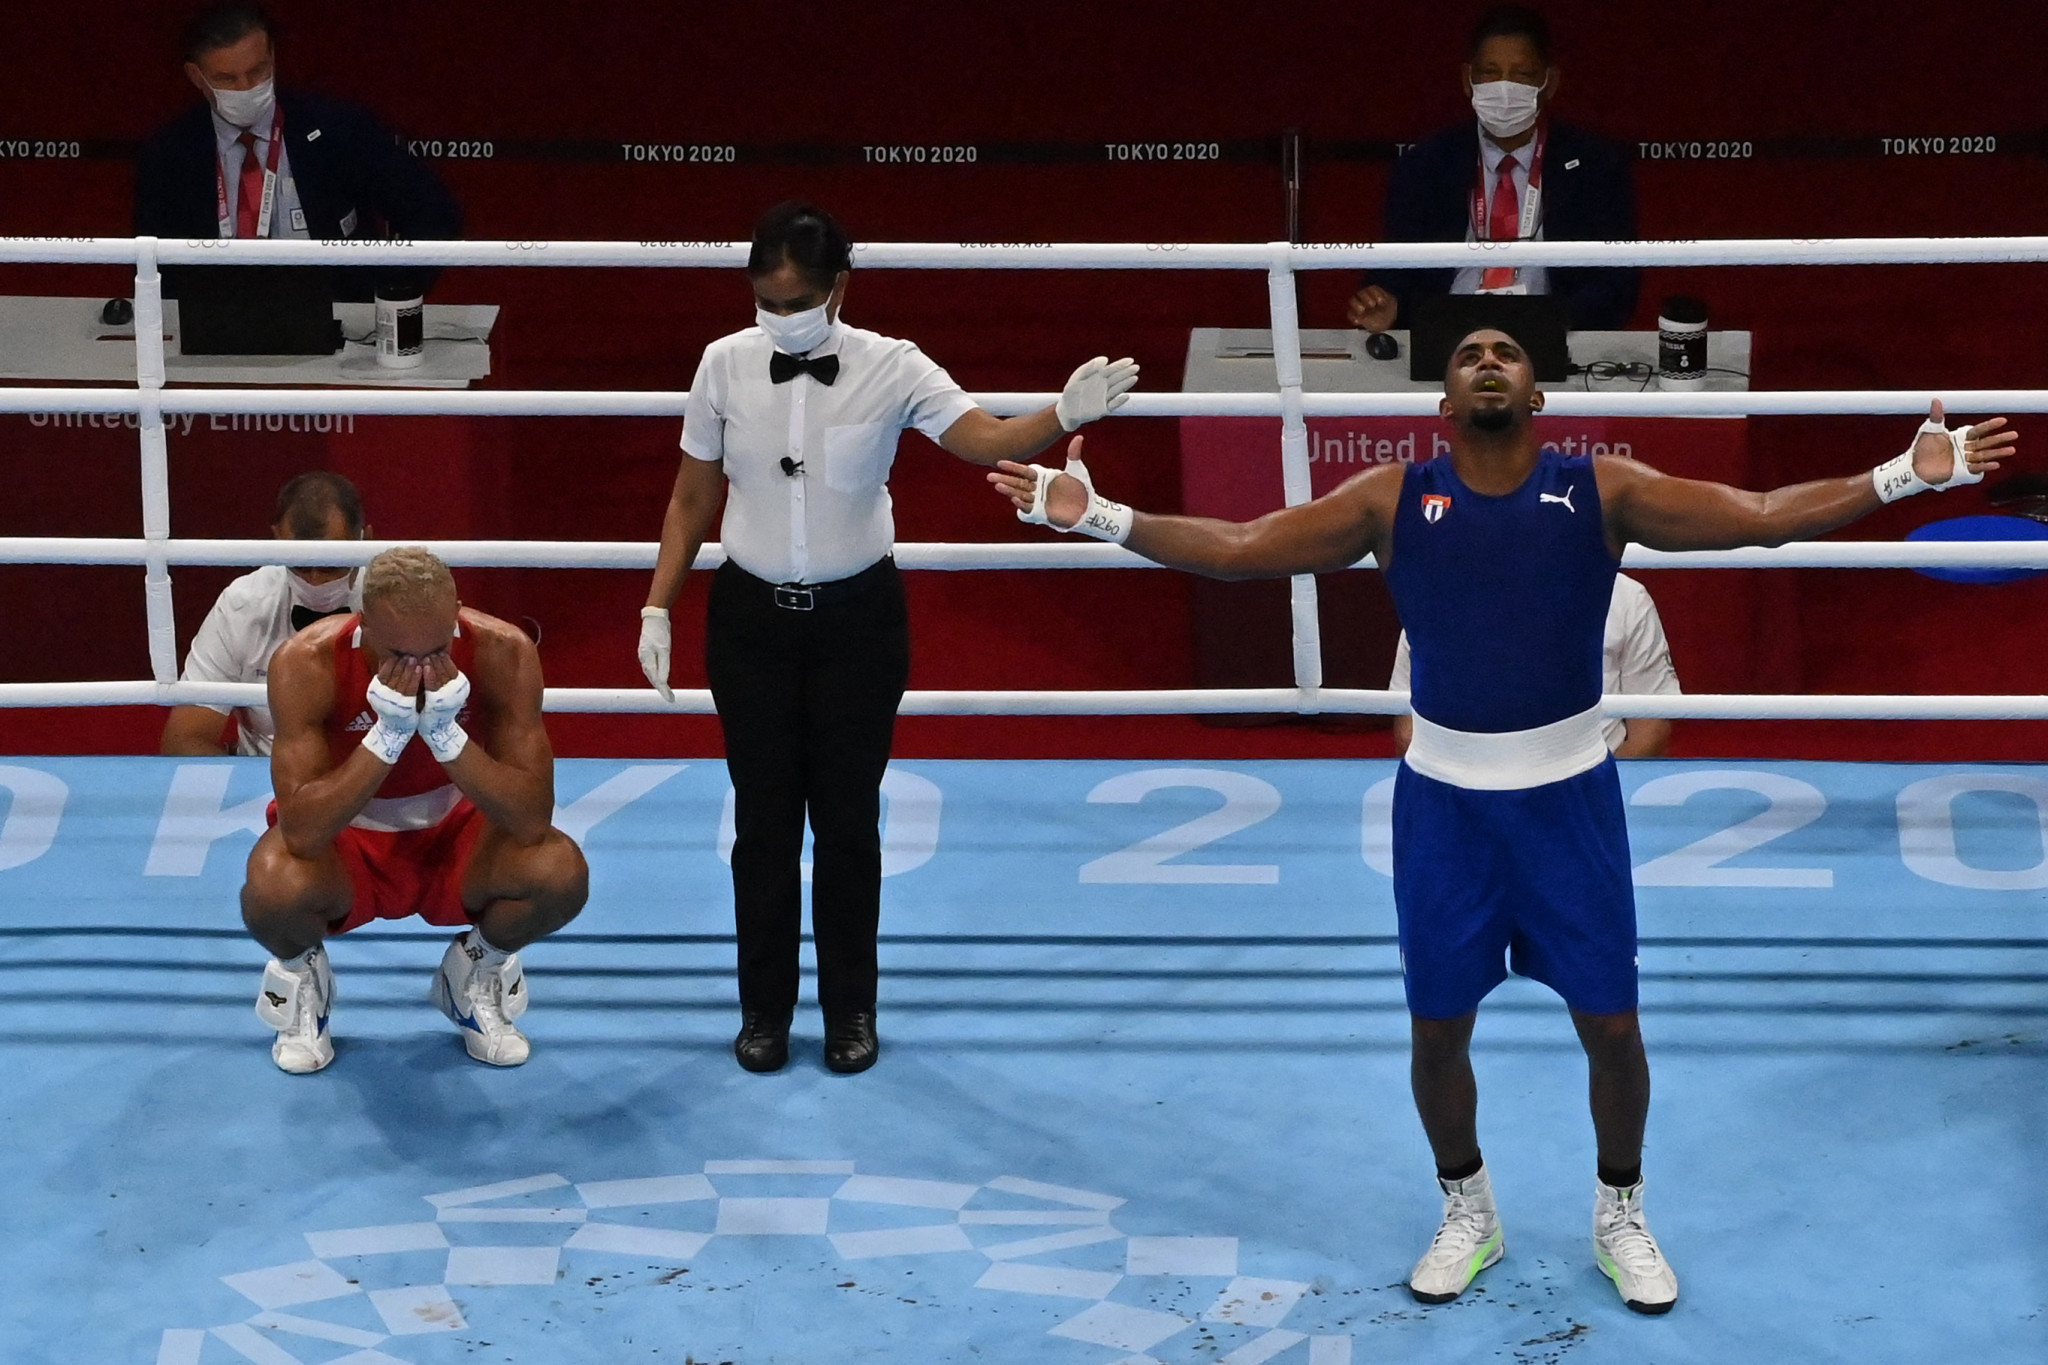 Sri Lankan referee Thampu Nelka Shiromala, centre, officiated the men’s light heavyweight final between Britain's Benjamin Whittaker, left, and Cuba's Arlen López, right, at the Tokyo 2020 Olympics ©Getty Images